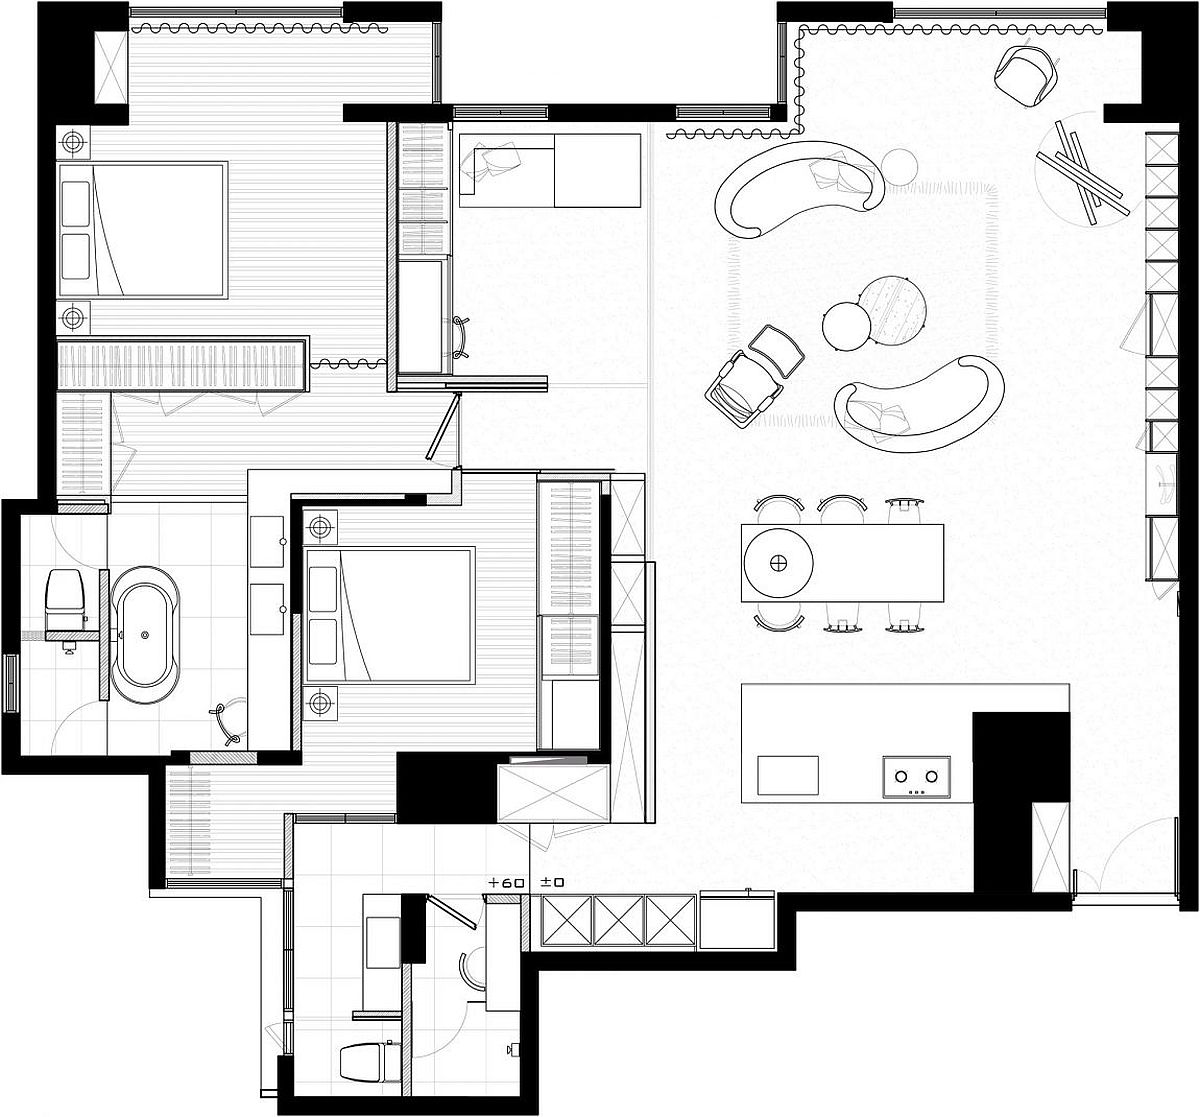 Floor plan of the revamped private residence in Taipei